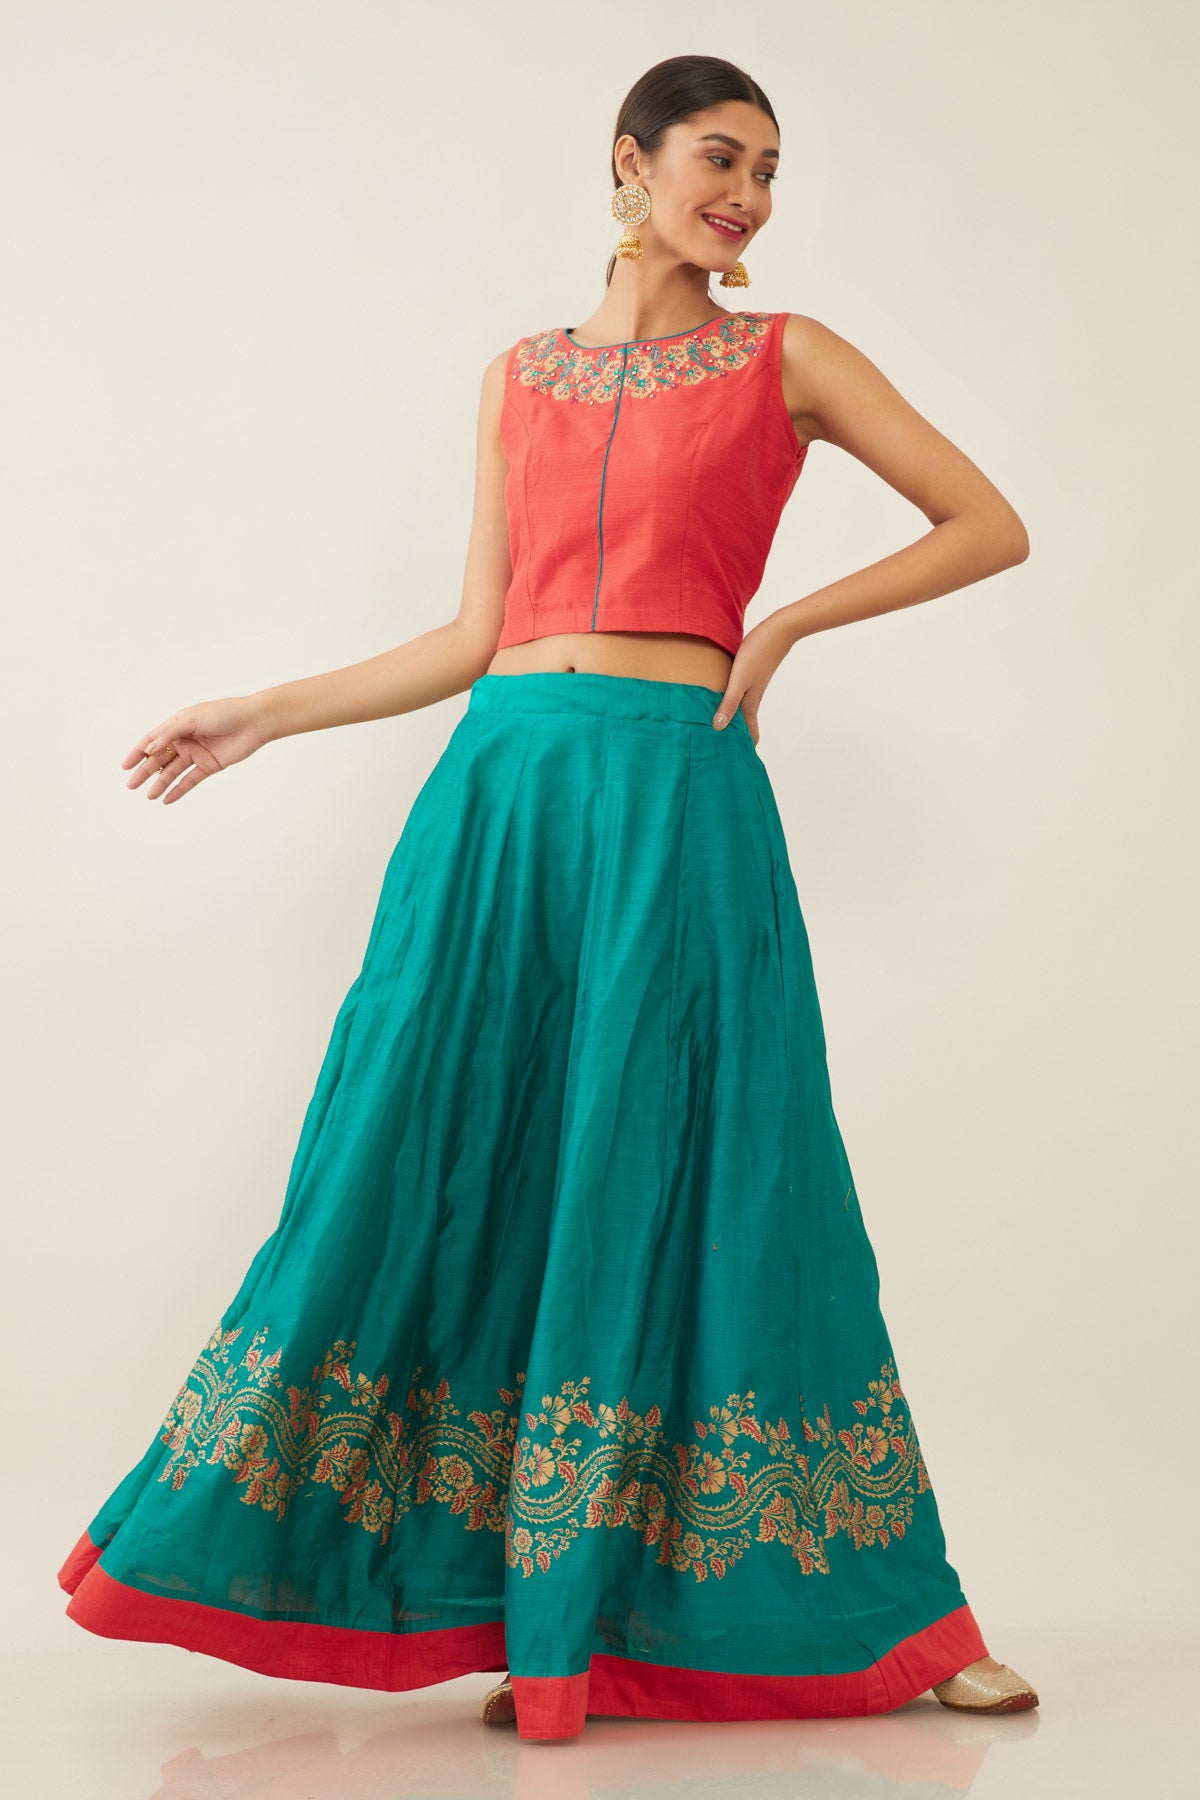 ETHNIC FLORAL PRINTED SKIRT WITH EMBROIDERED TOP - PEACH & TEAL GREEN